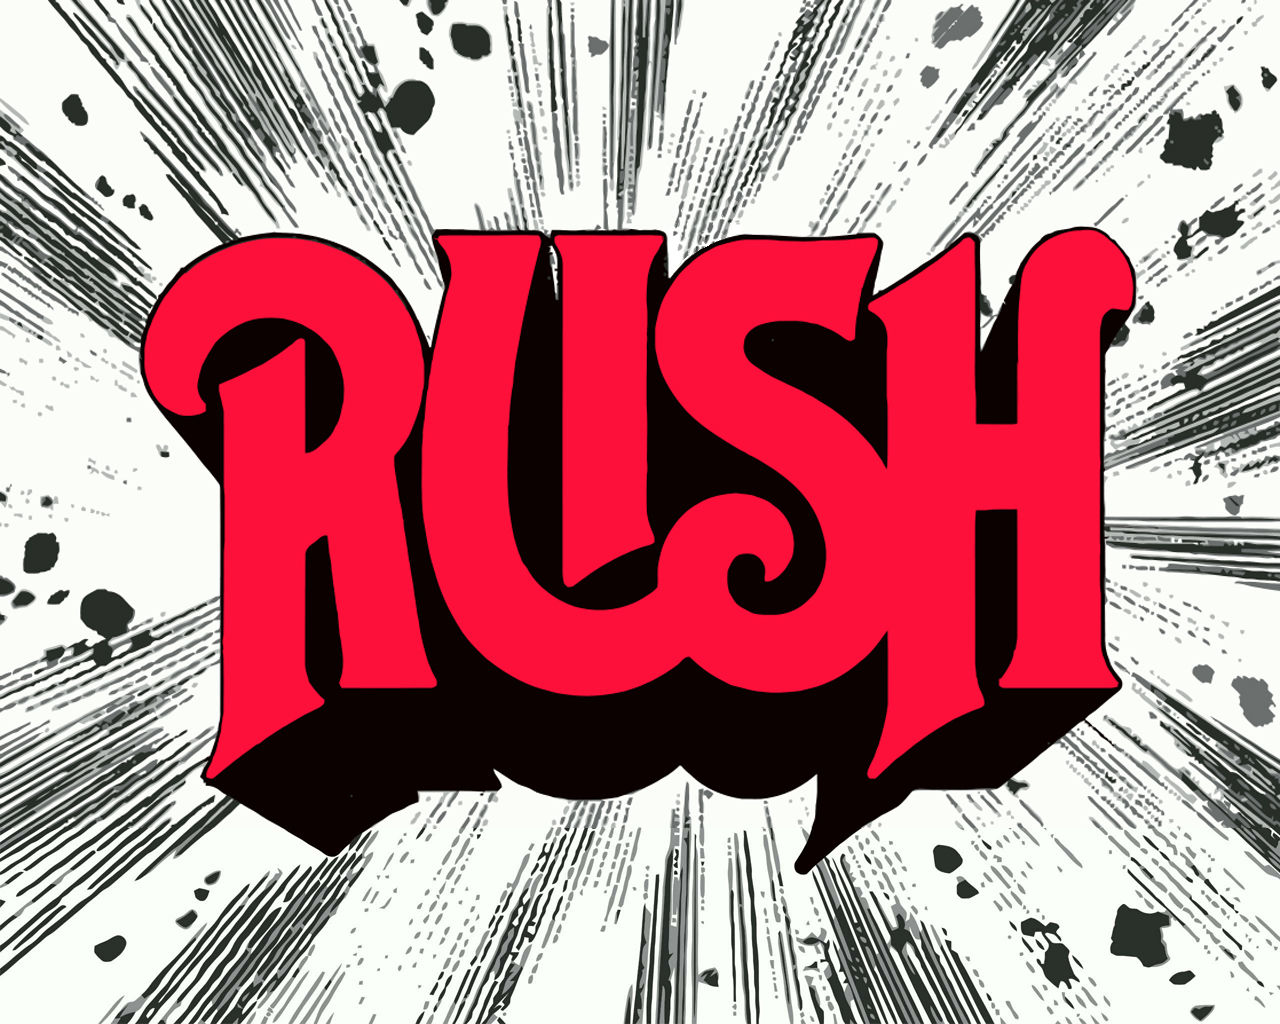 See Rush Considered For Induction Into The Rock And Roll Hall Of Fame